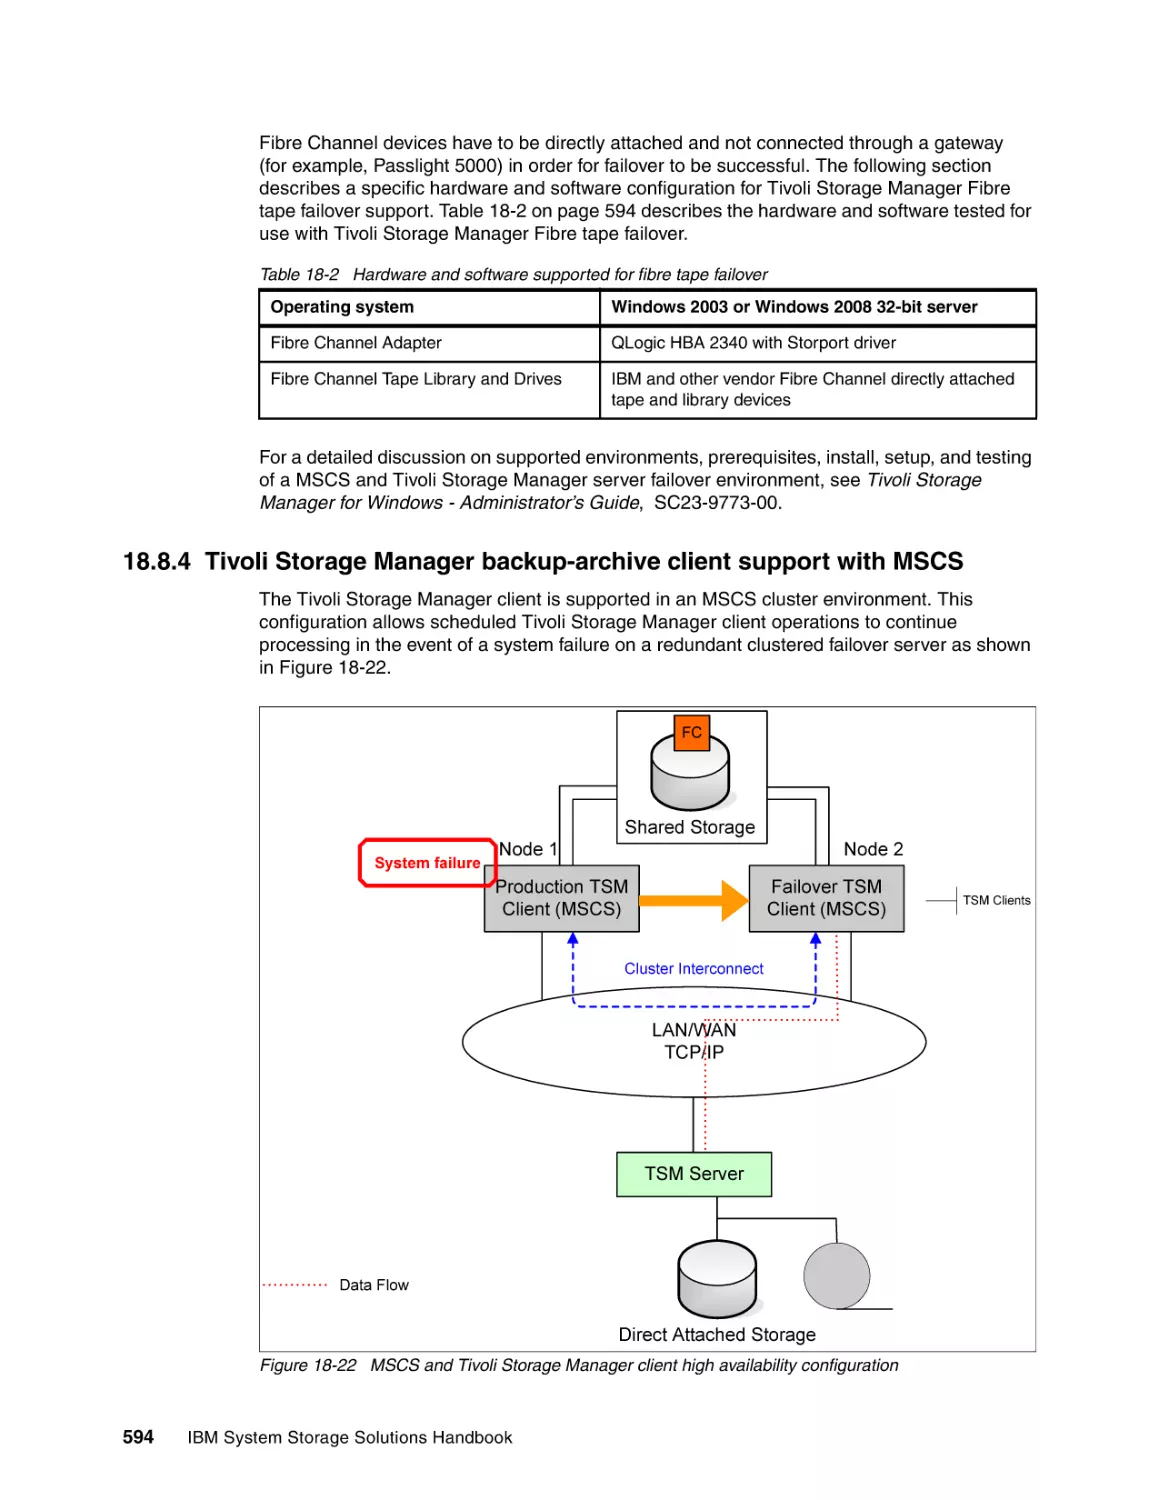 18.8.4 Tivoli Storage Manager backup-archive client support with MSCS